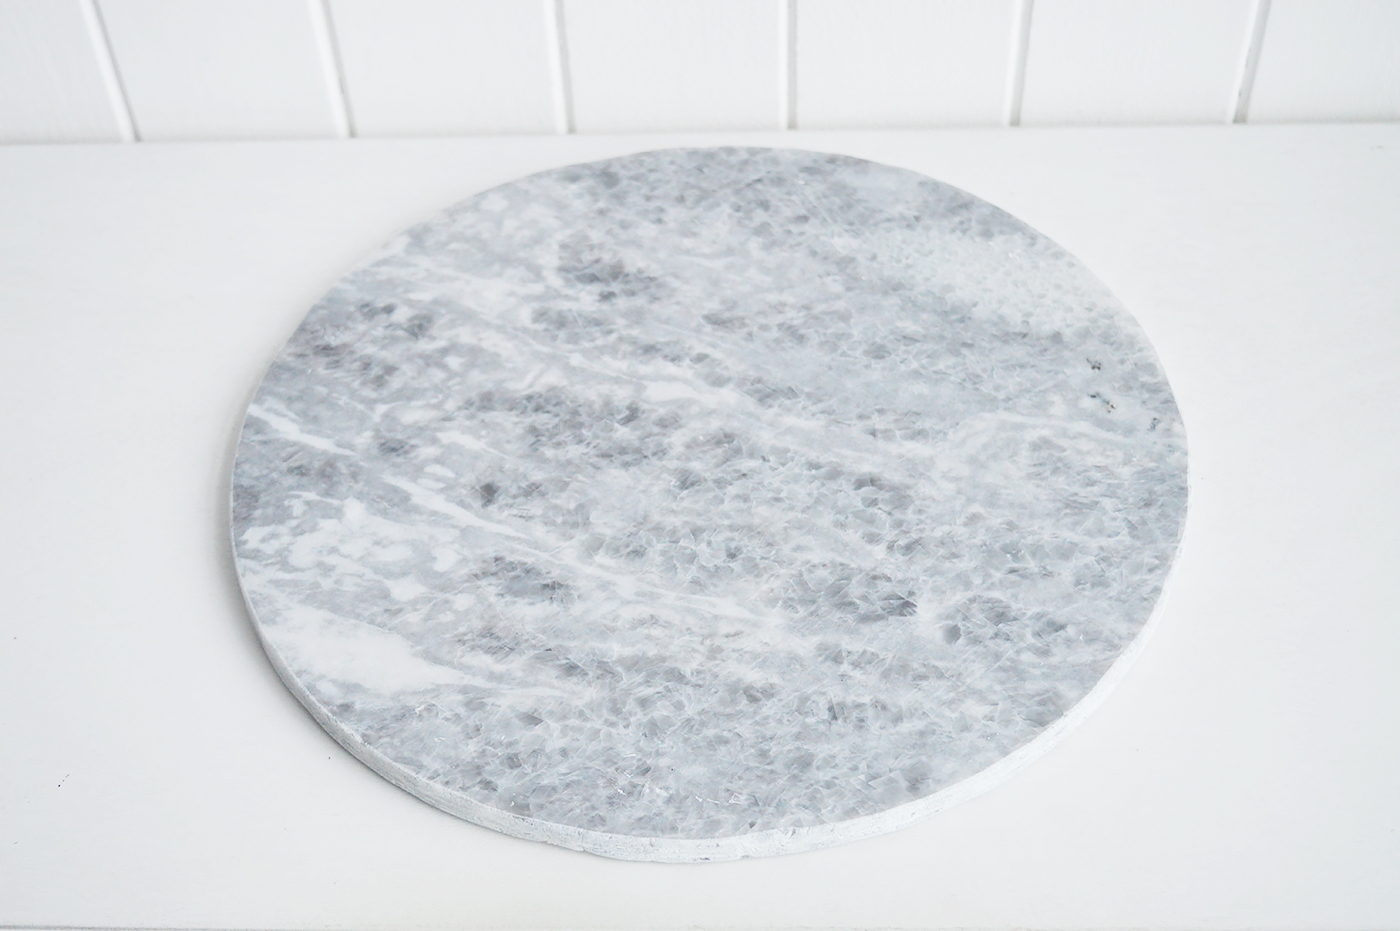 Grey & White marble Round Tray Chopping Board- New England style White Home Accessories for country, coastal and city homes and interiors